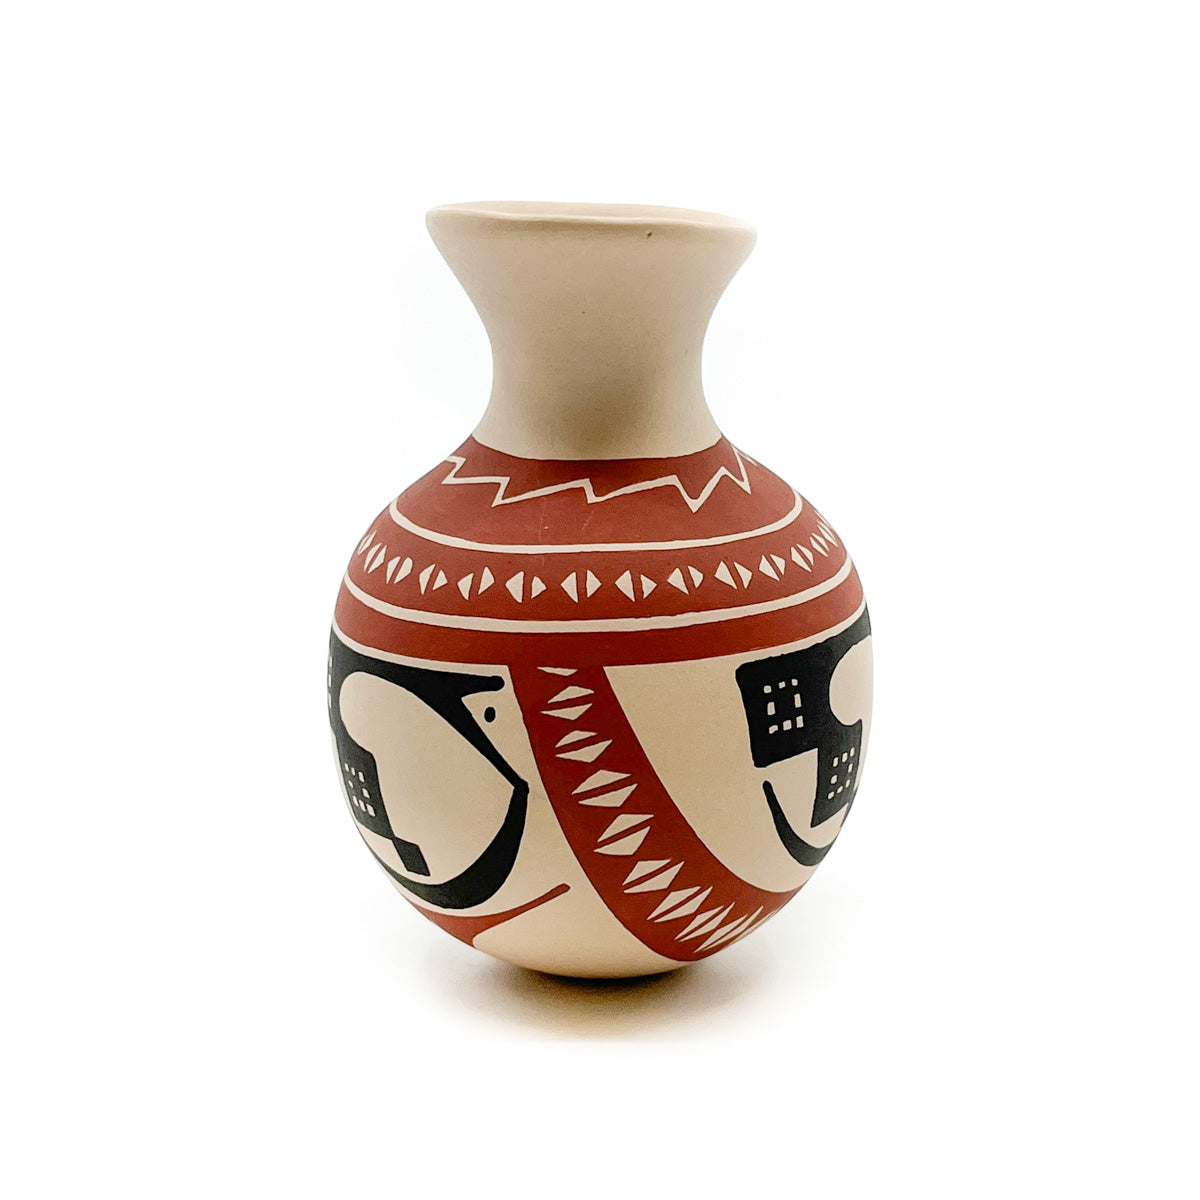 Small Vase with Red & Black Designs on White Clay